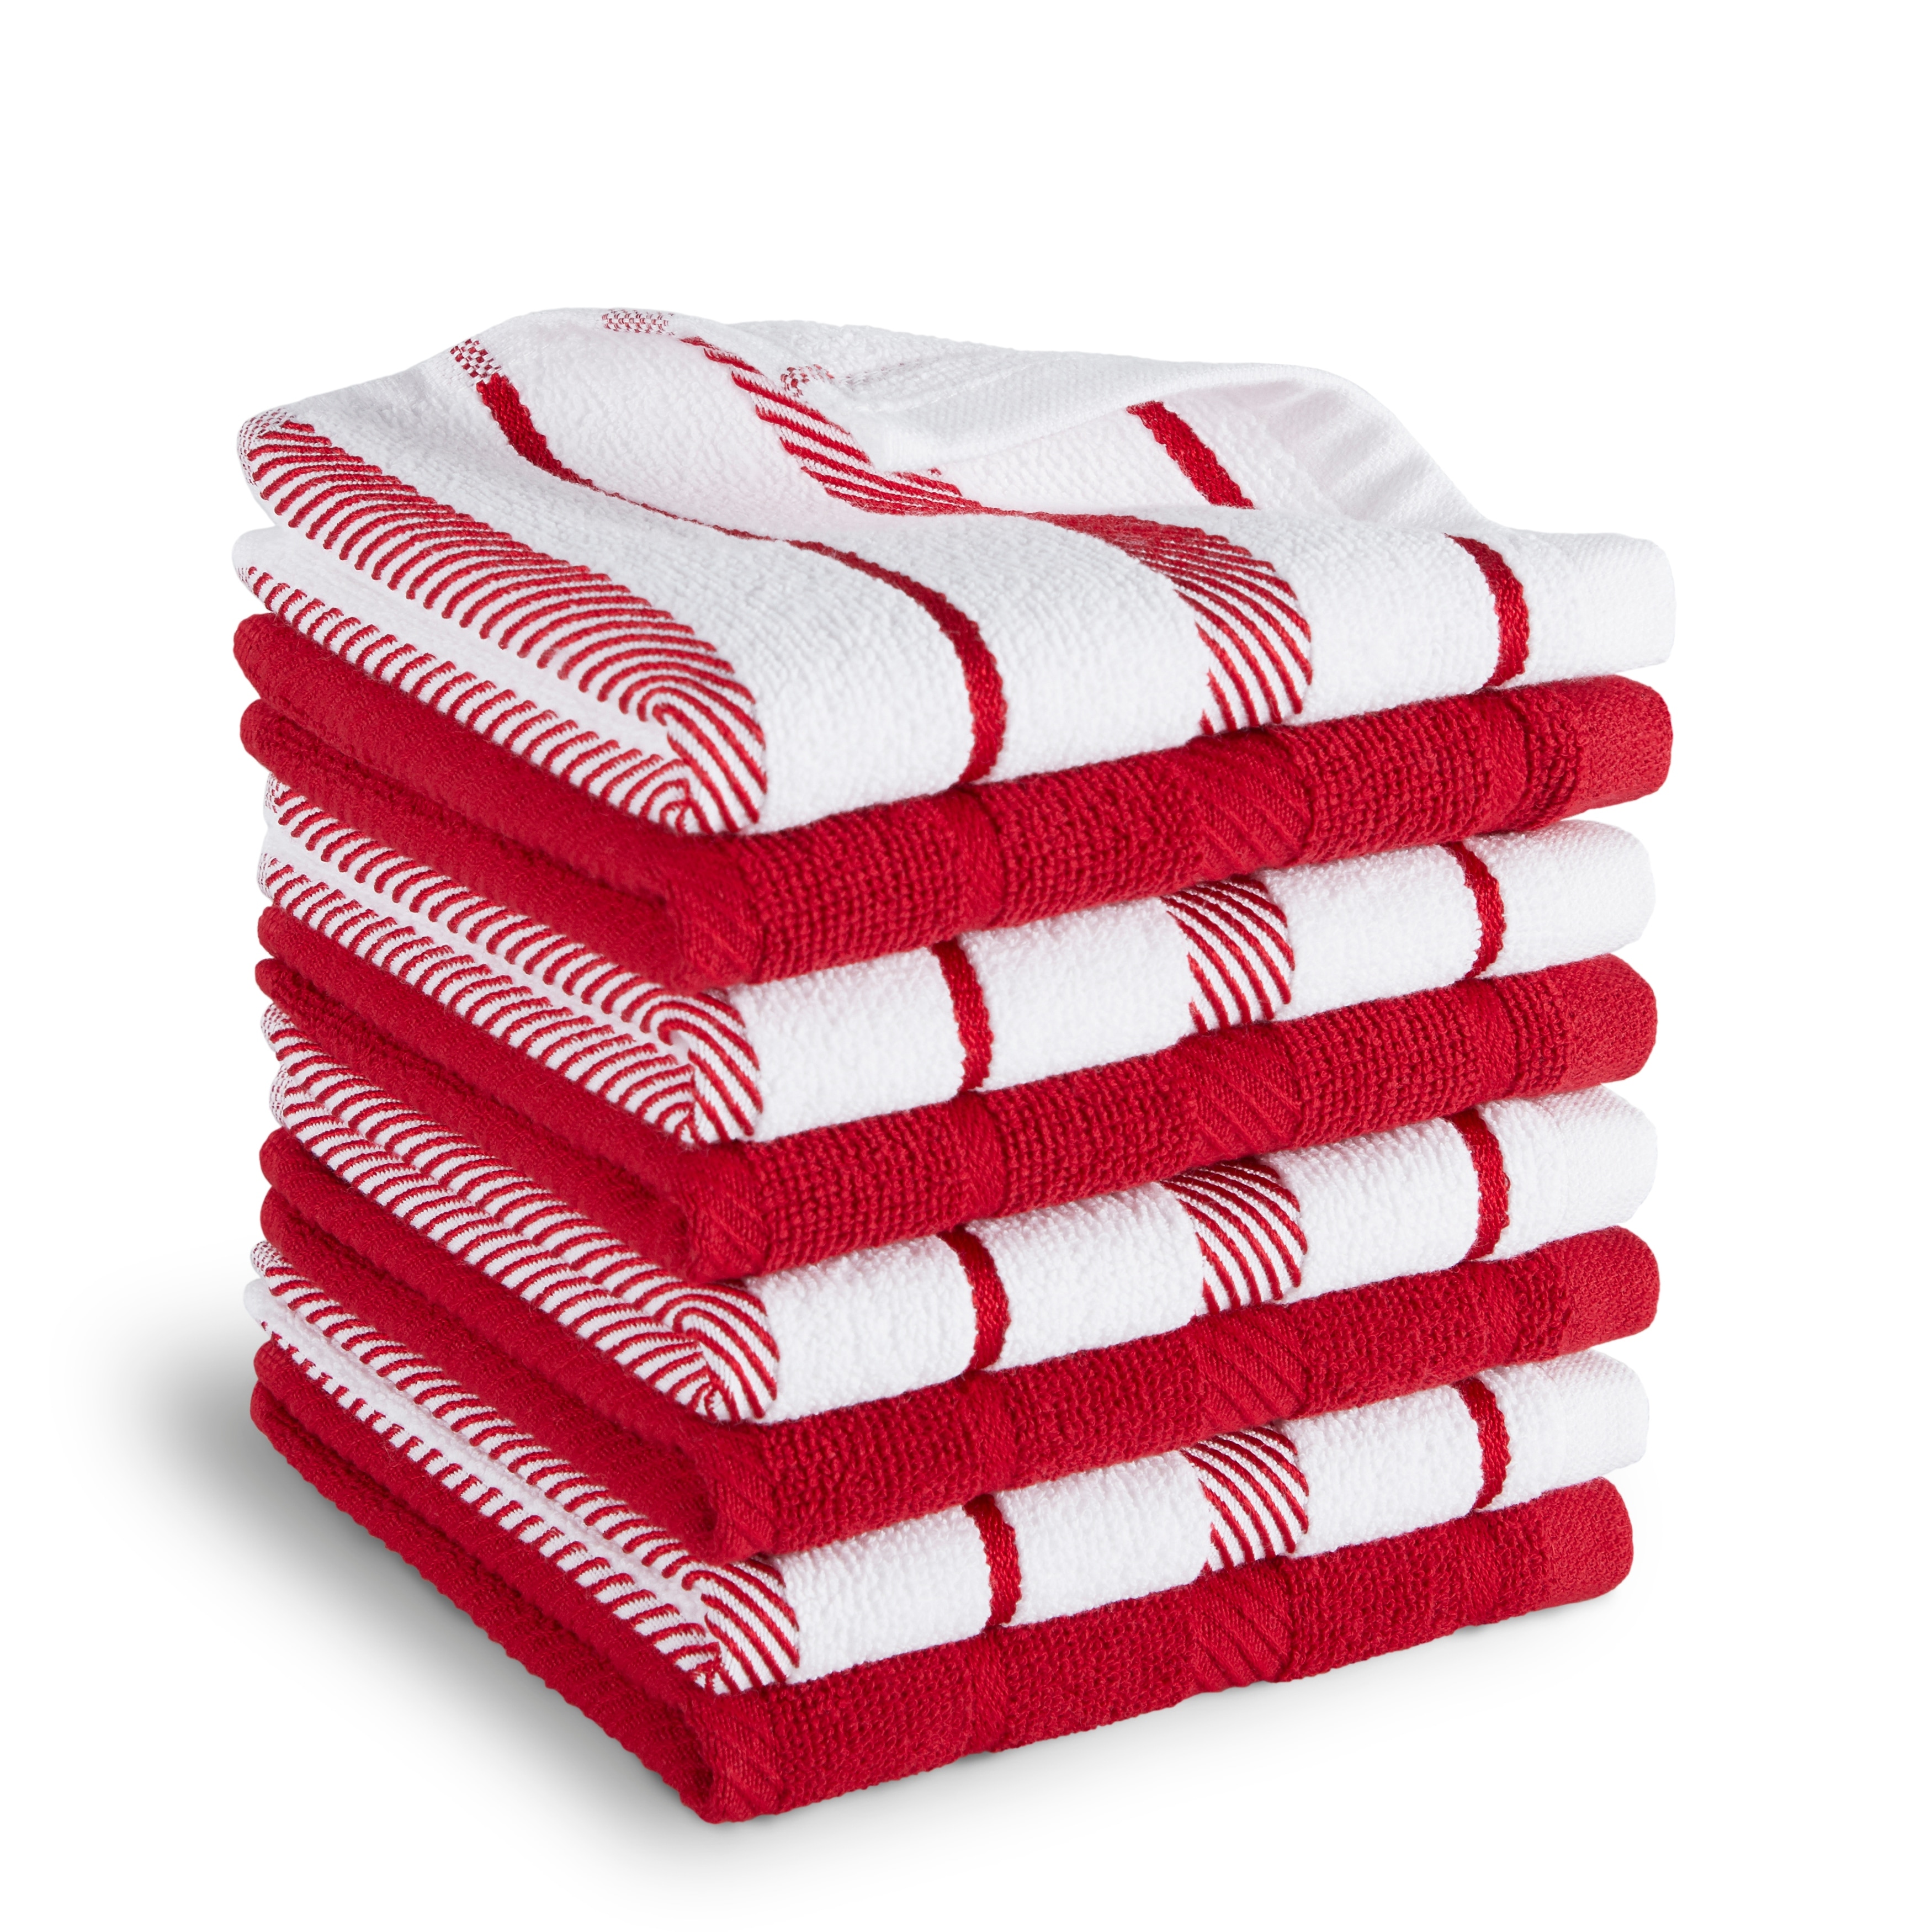 https://ak1.ostkcdn.com/images/products/is/images/direct/77d70df3990ffa576d3905c828d0a4737ef061aa/KitchenAid-Albany-Dishcloth-Set-8-Pack.jpg